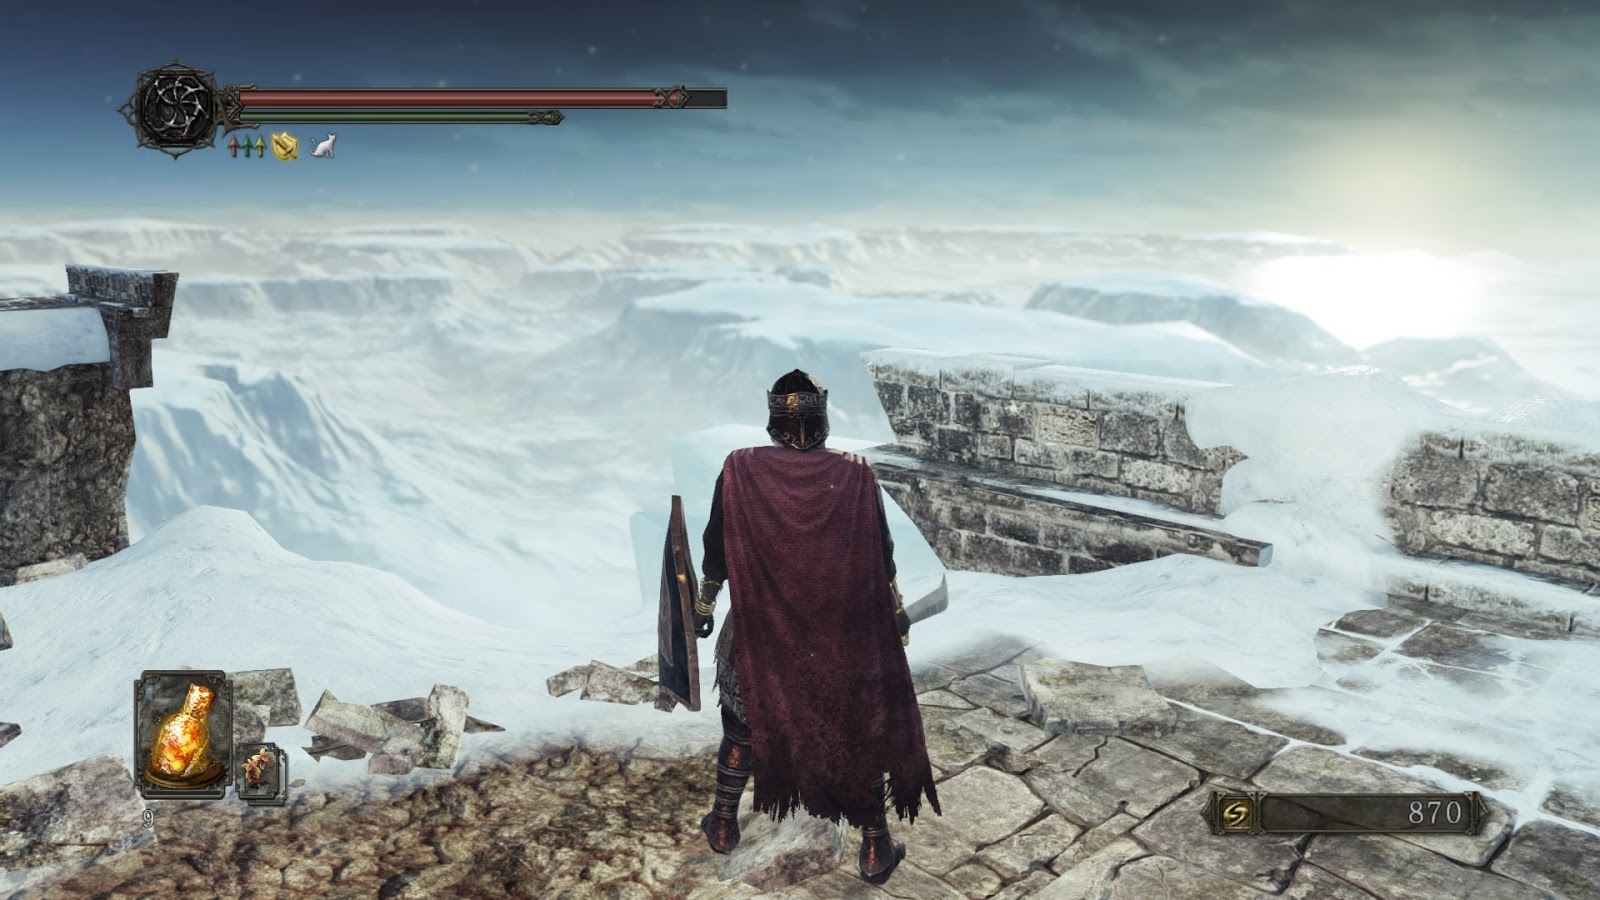 Wobble Reviews - Bob Surlaw's Words of Mouth: Dark Souls II (2014